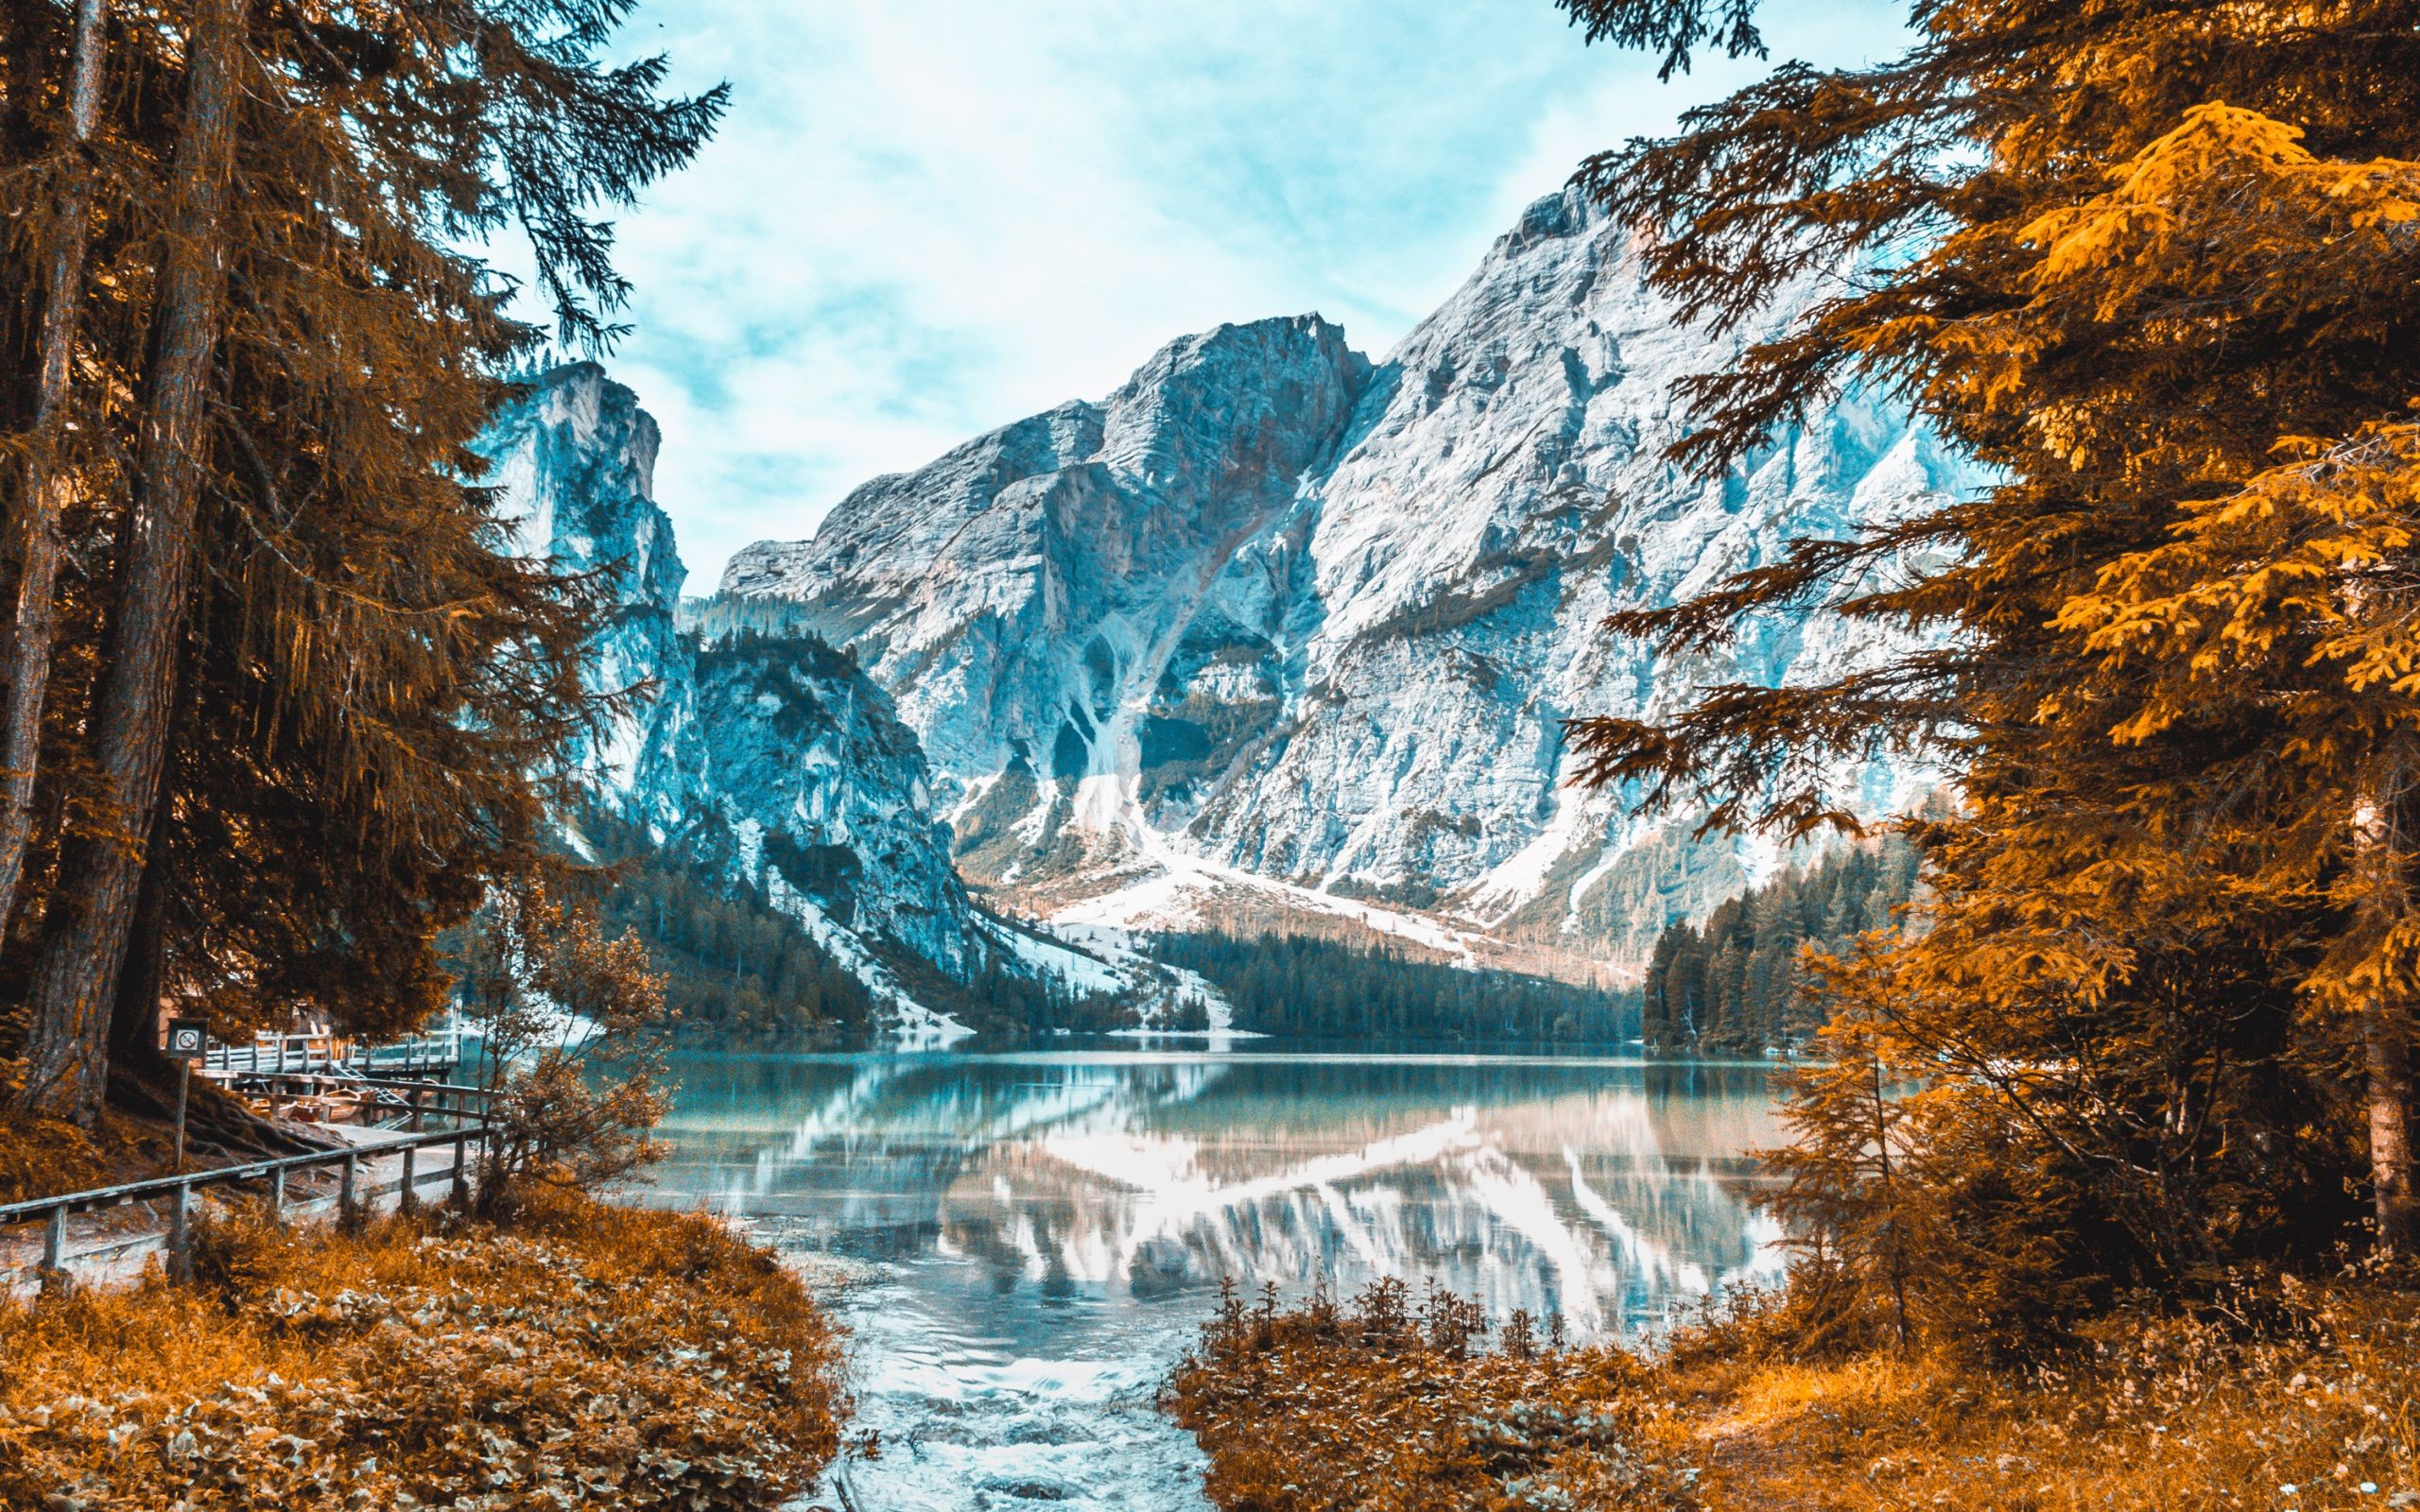 Download Snow Capped Mountain, Lake, Forest, Nature, Autumn Wallpaper, 2560x Dual Wide, Widescreen 16: Widescreen